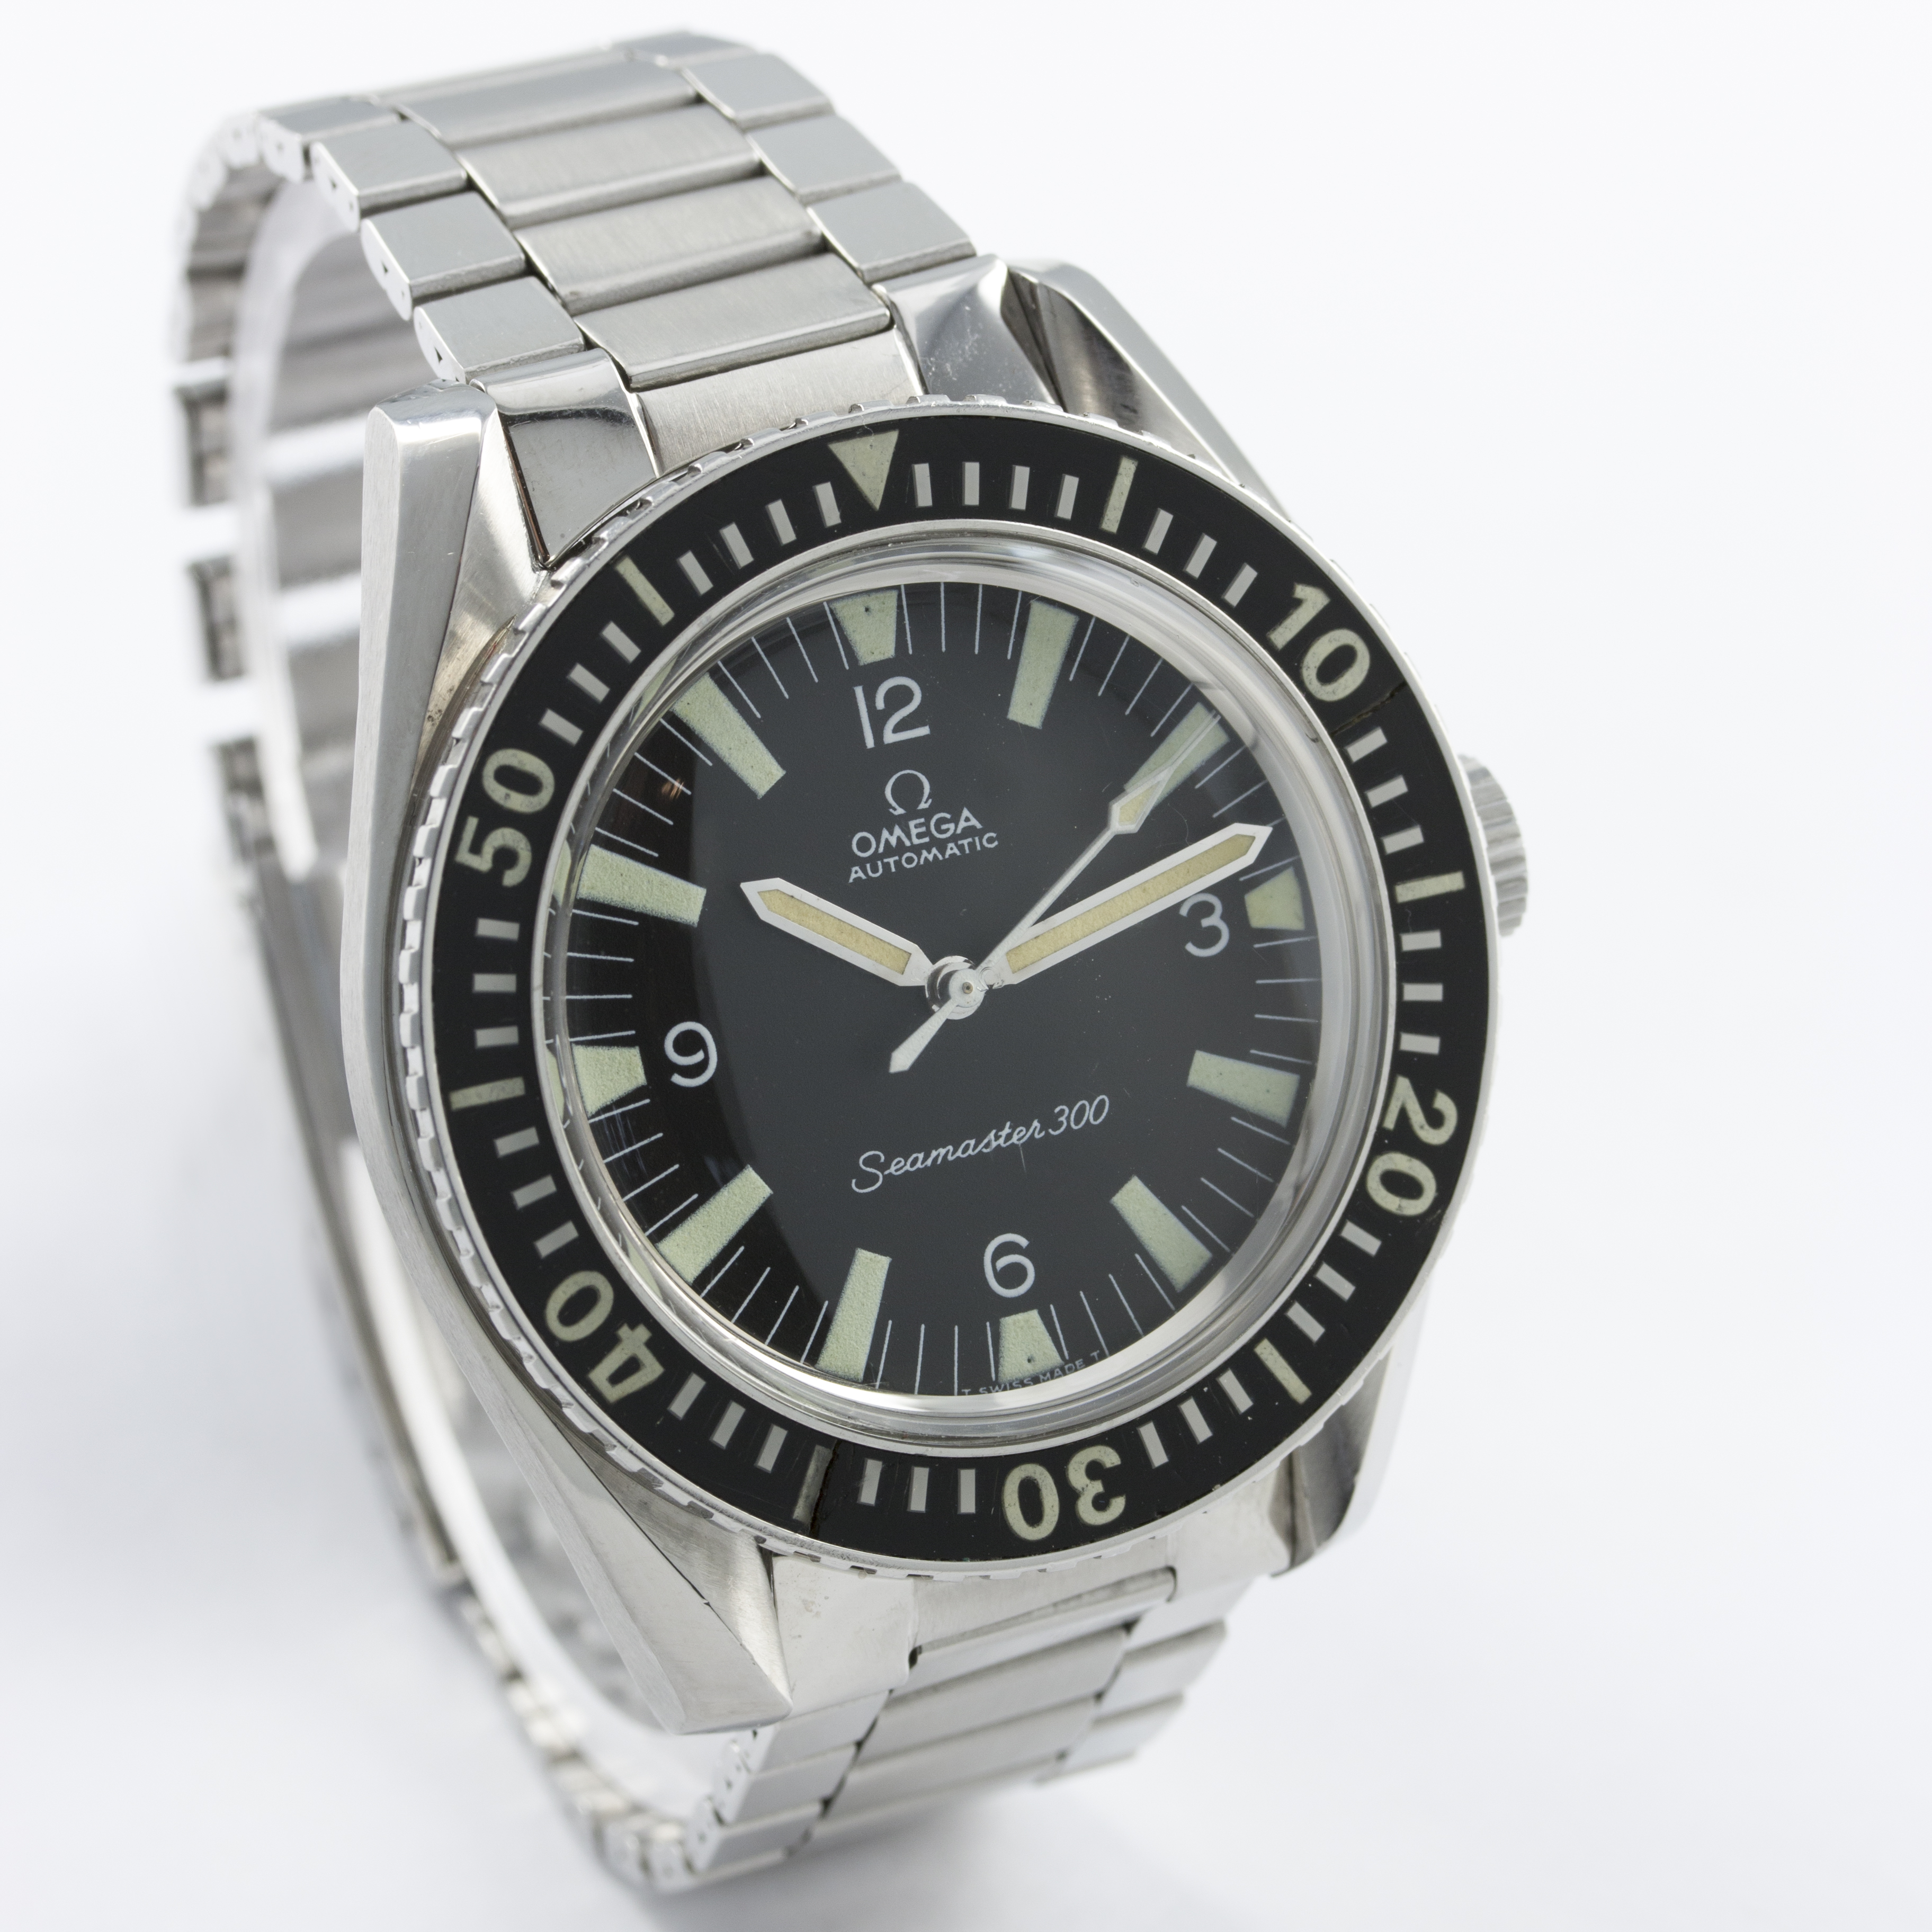 A RARE GENTLEMAN'S STAINLESS STEEL OMEGA SEAMASTER 300 BRACELET WATCH CIRCA 1967, REF. 165.024 D: - Image 6 of 10